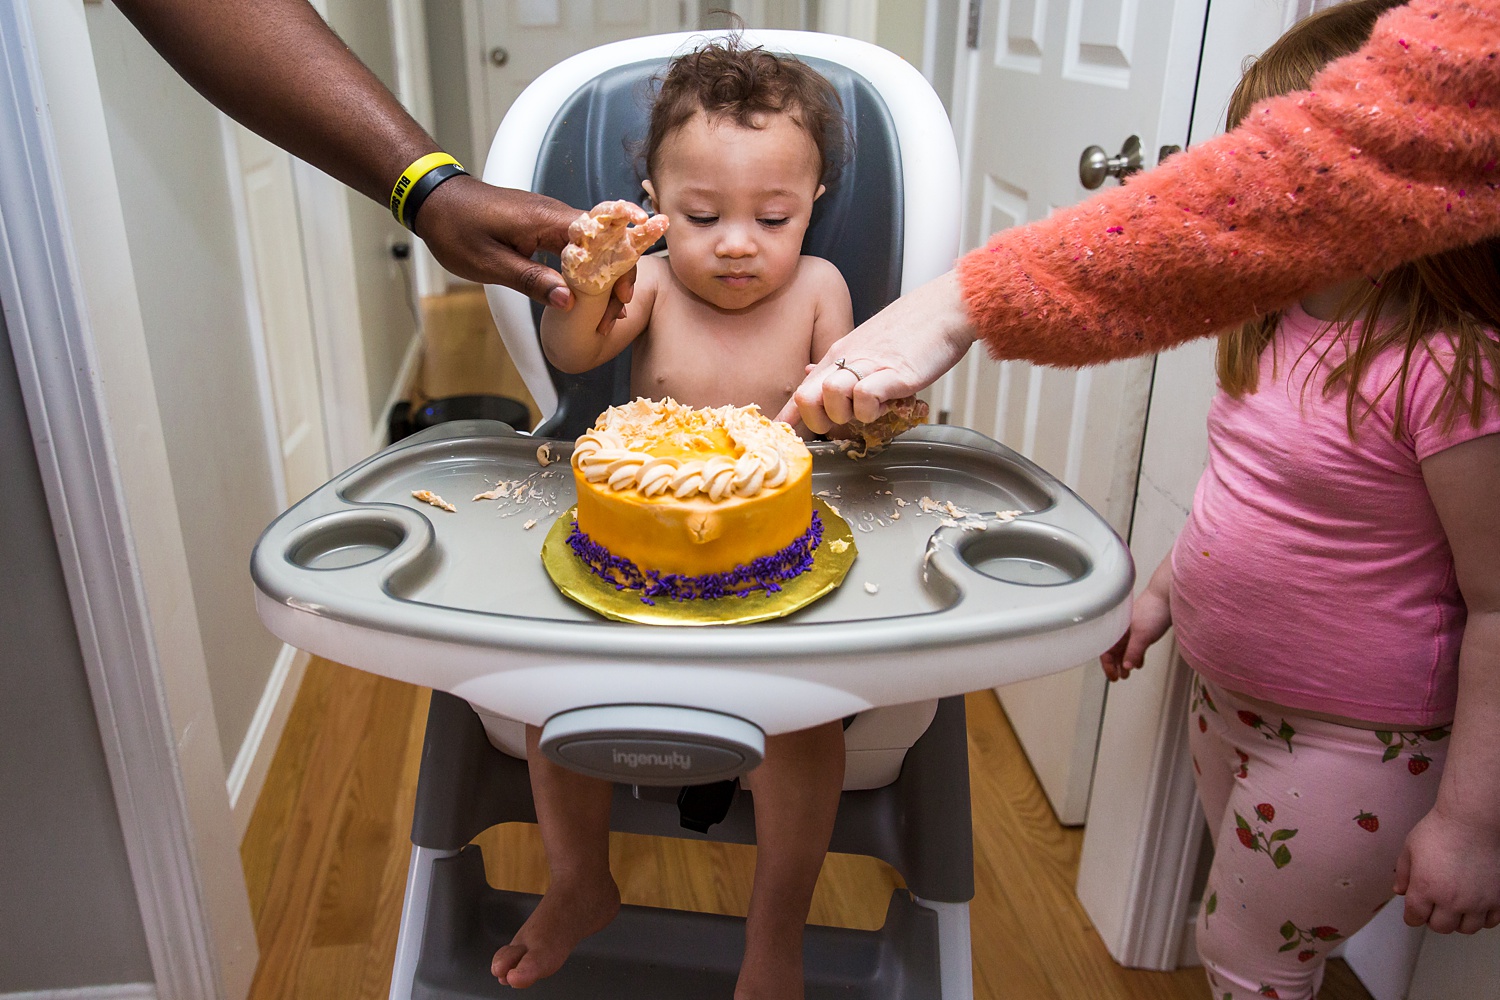 Smashing the cake with a little help from his parents